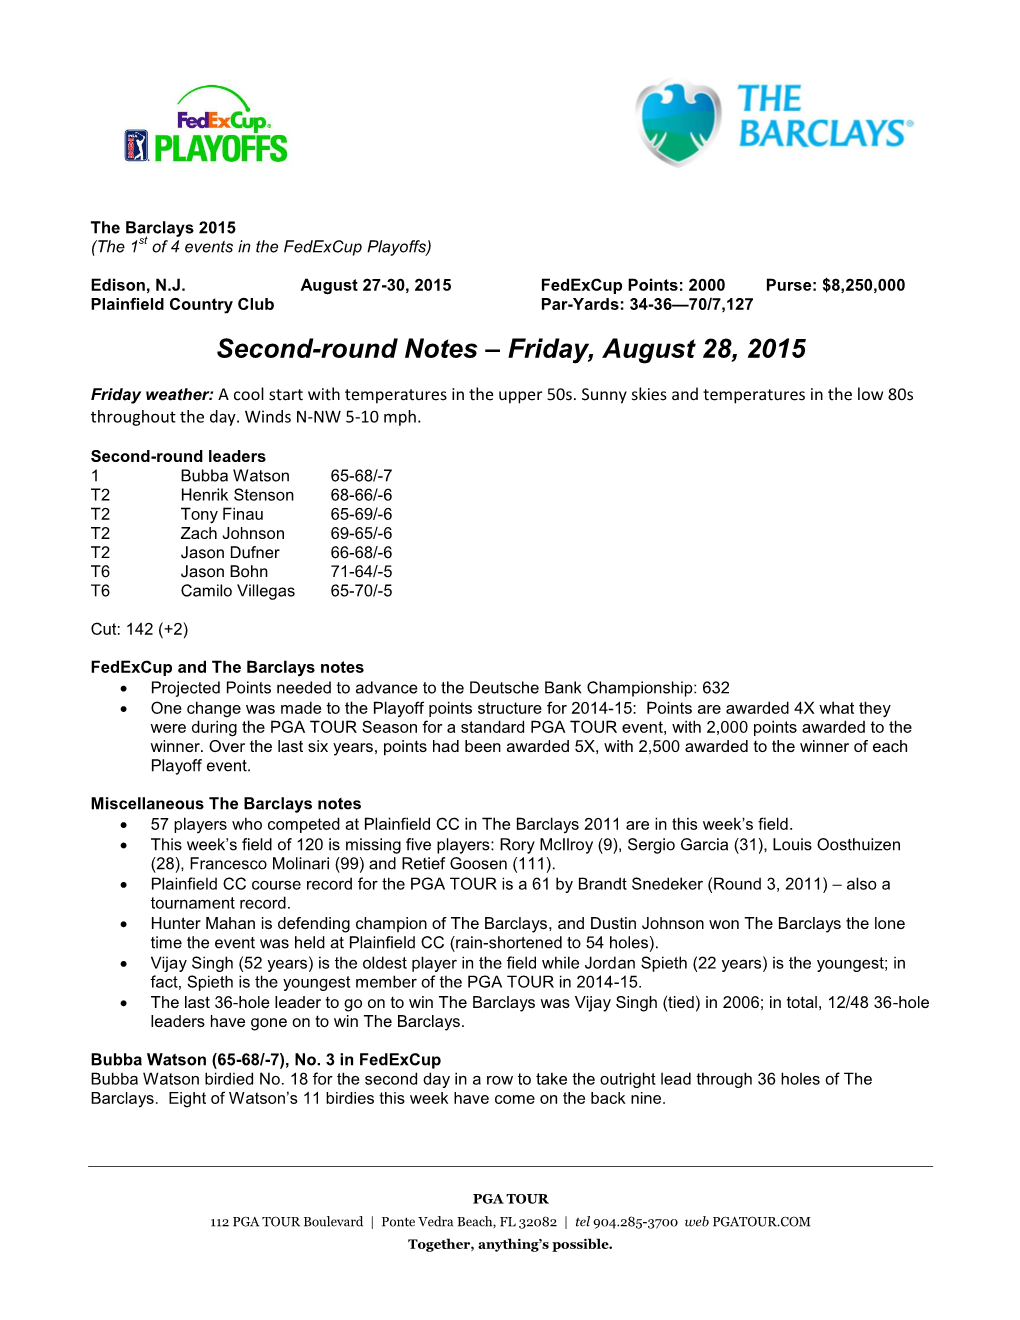 Second-Round Notes – Friday, August 28, 2015